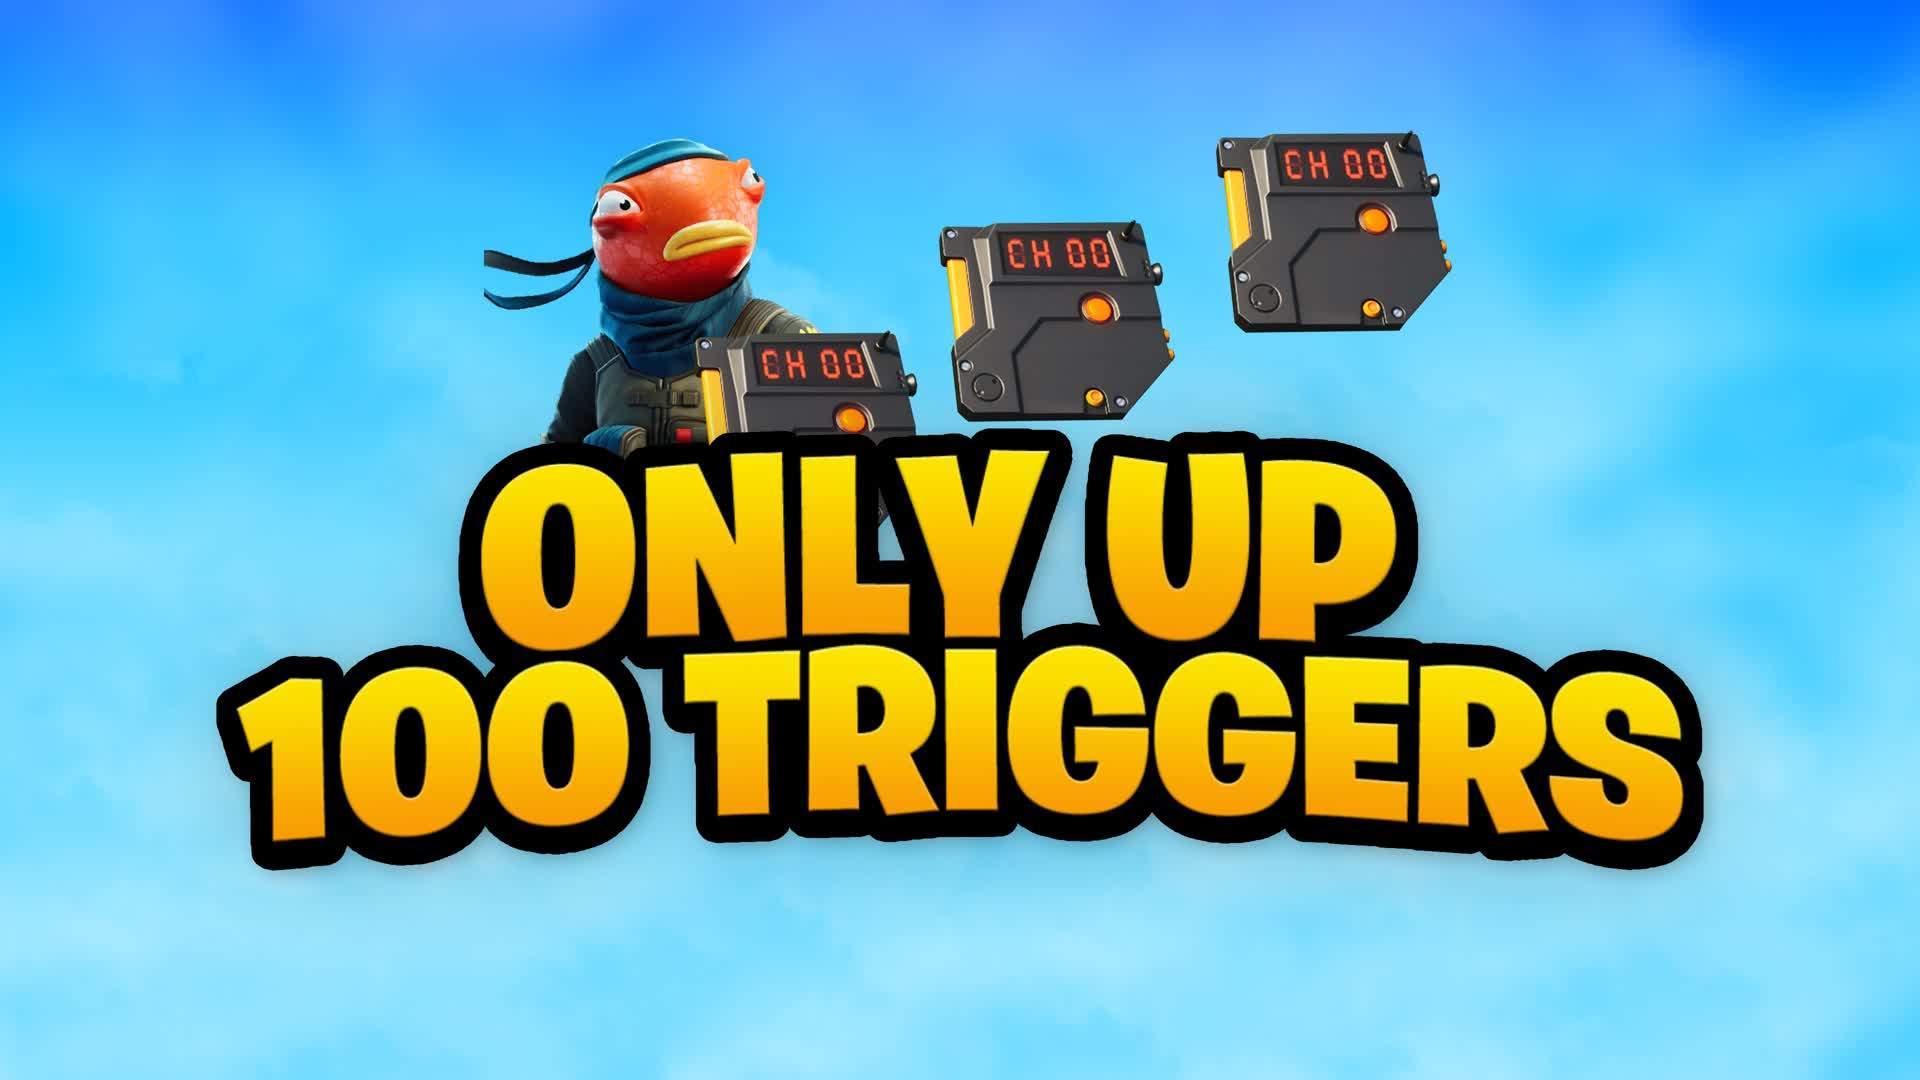 Only Up 100 Triggers